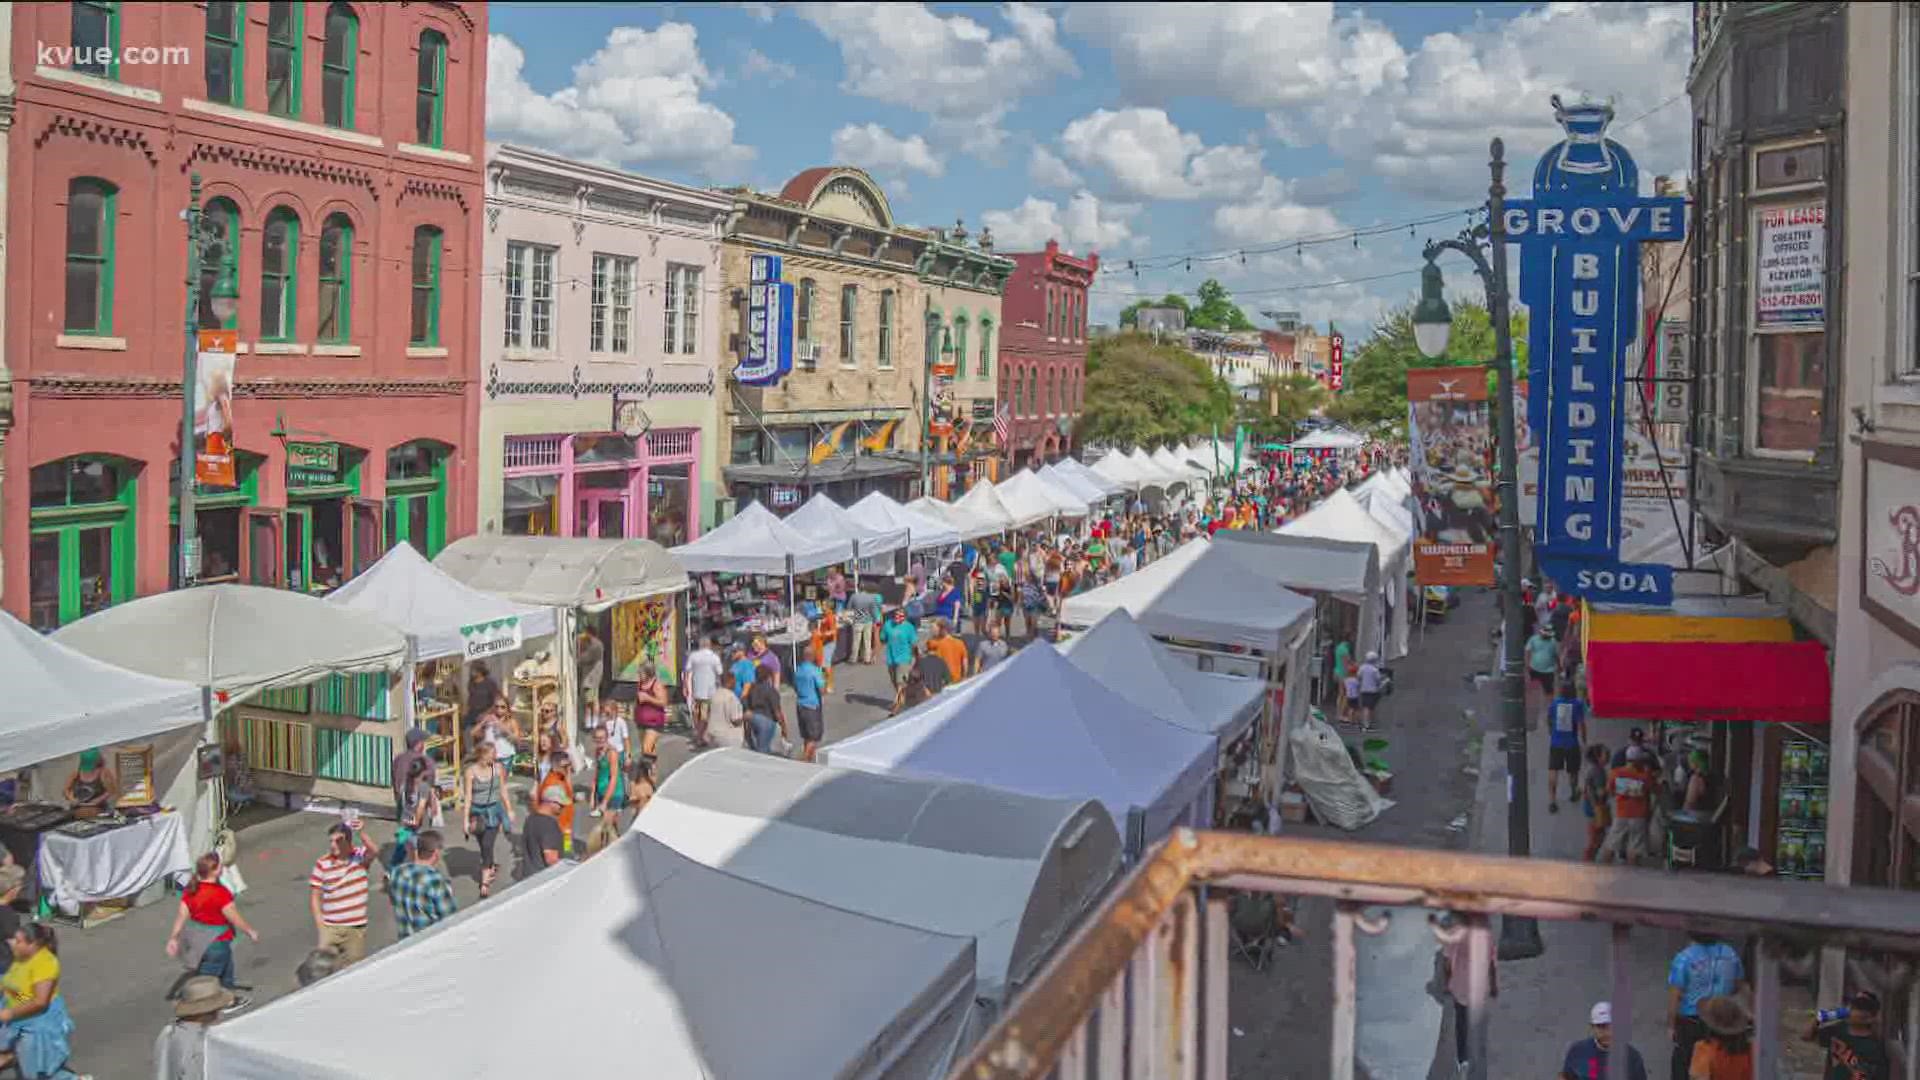 The 40th Annual Pecan Street Festival has been canceled.